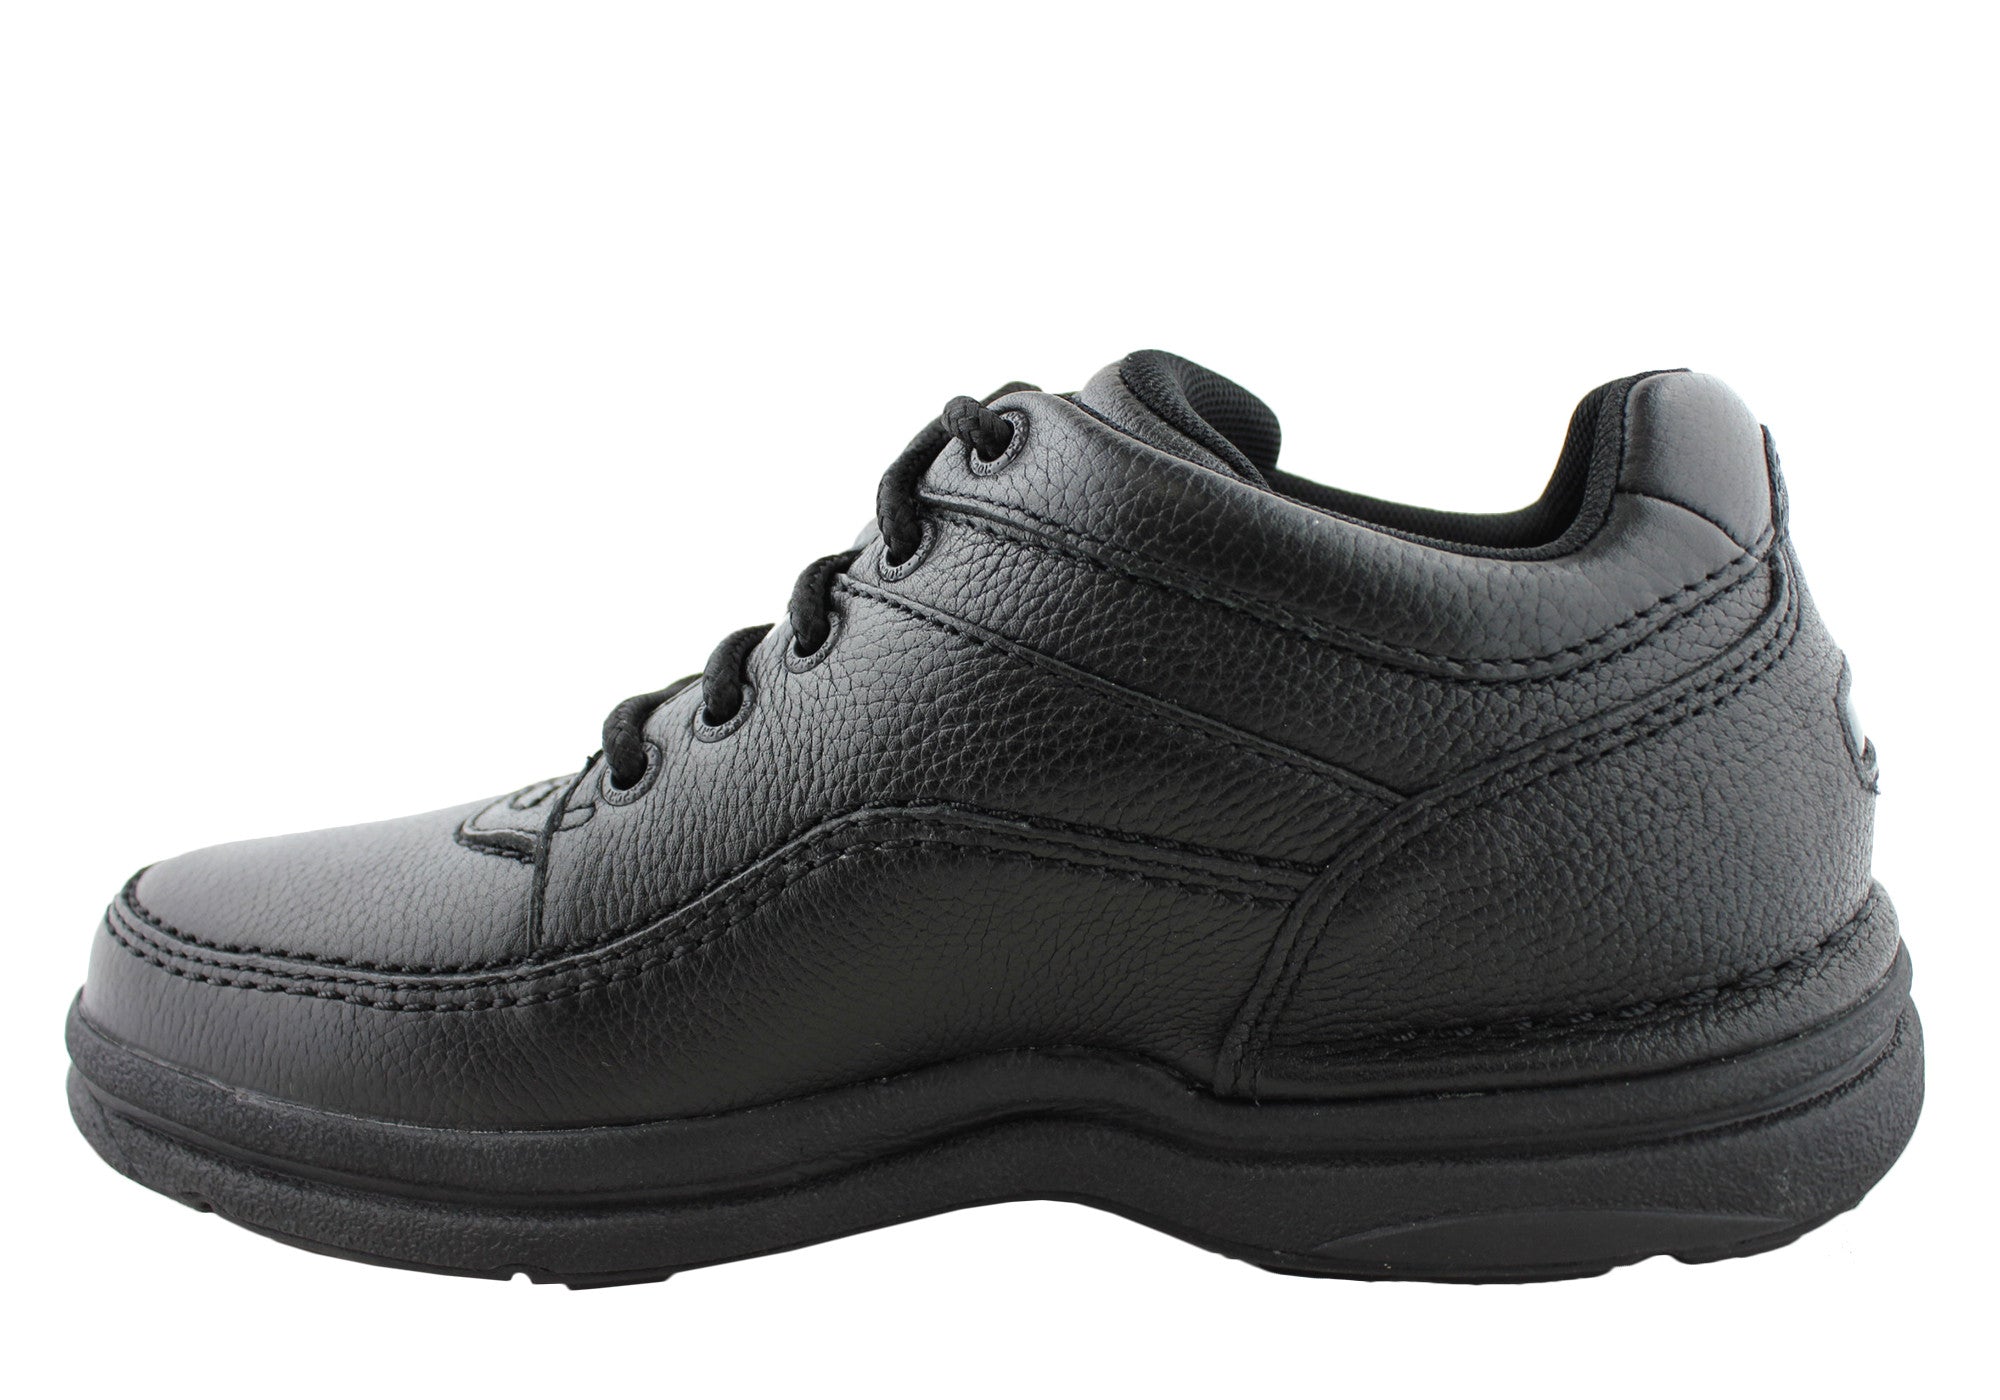 Rockport World Tour Classic Mens Comfort Wide Fit Walking Shoes